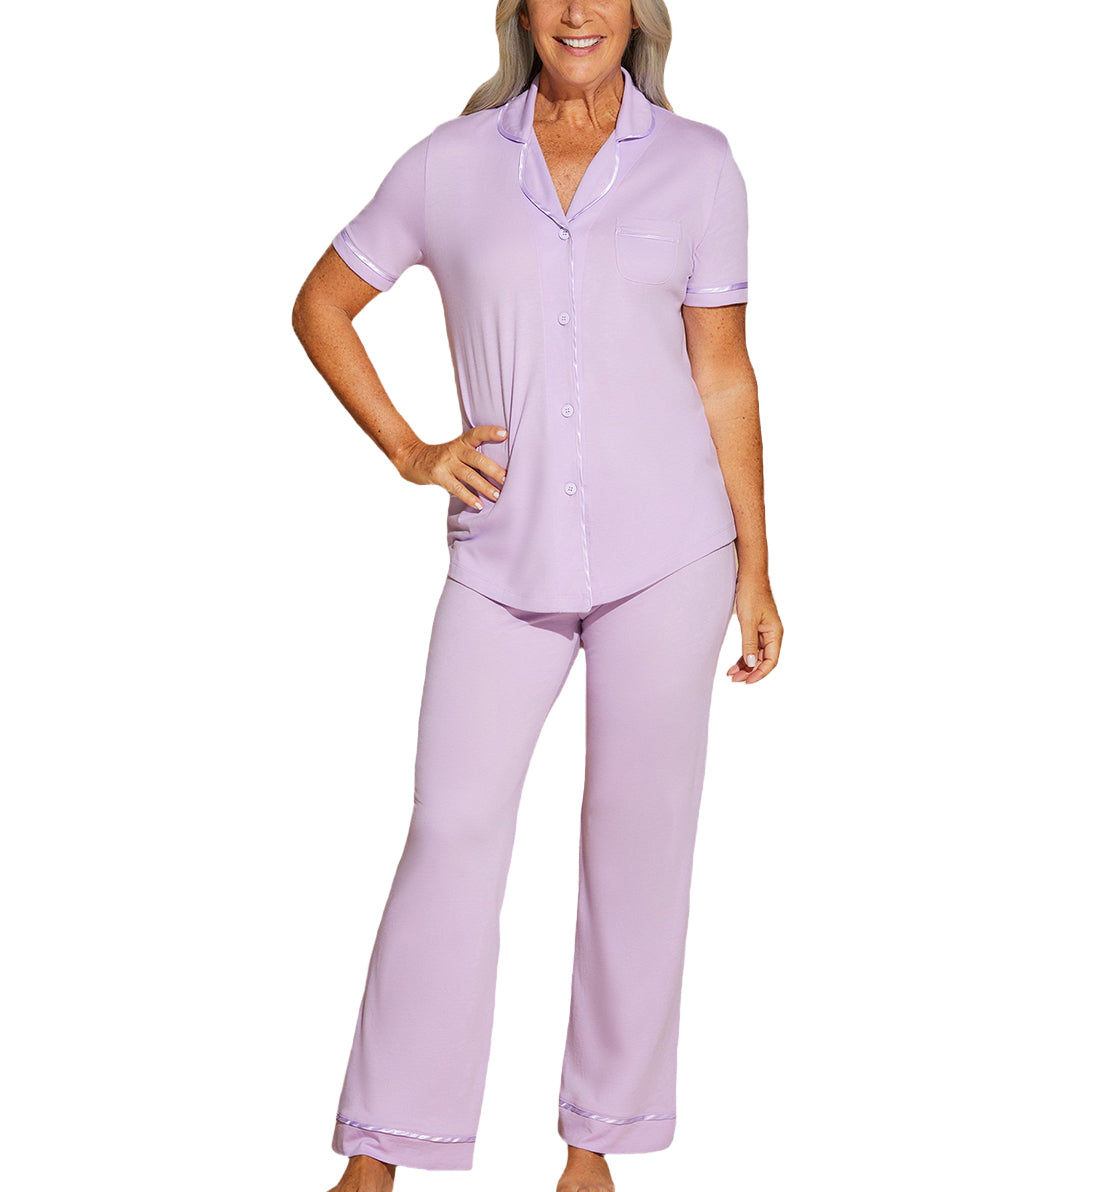 Cosabella Amore Bella Short Sleeve Top &amp; Pant PJ Set (AMORE9645),Small,Icy Violet - Icy Violet,Small